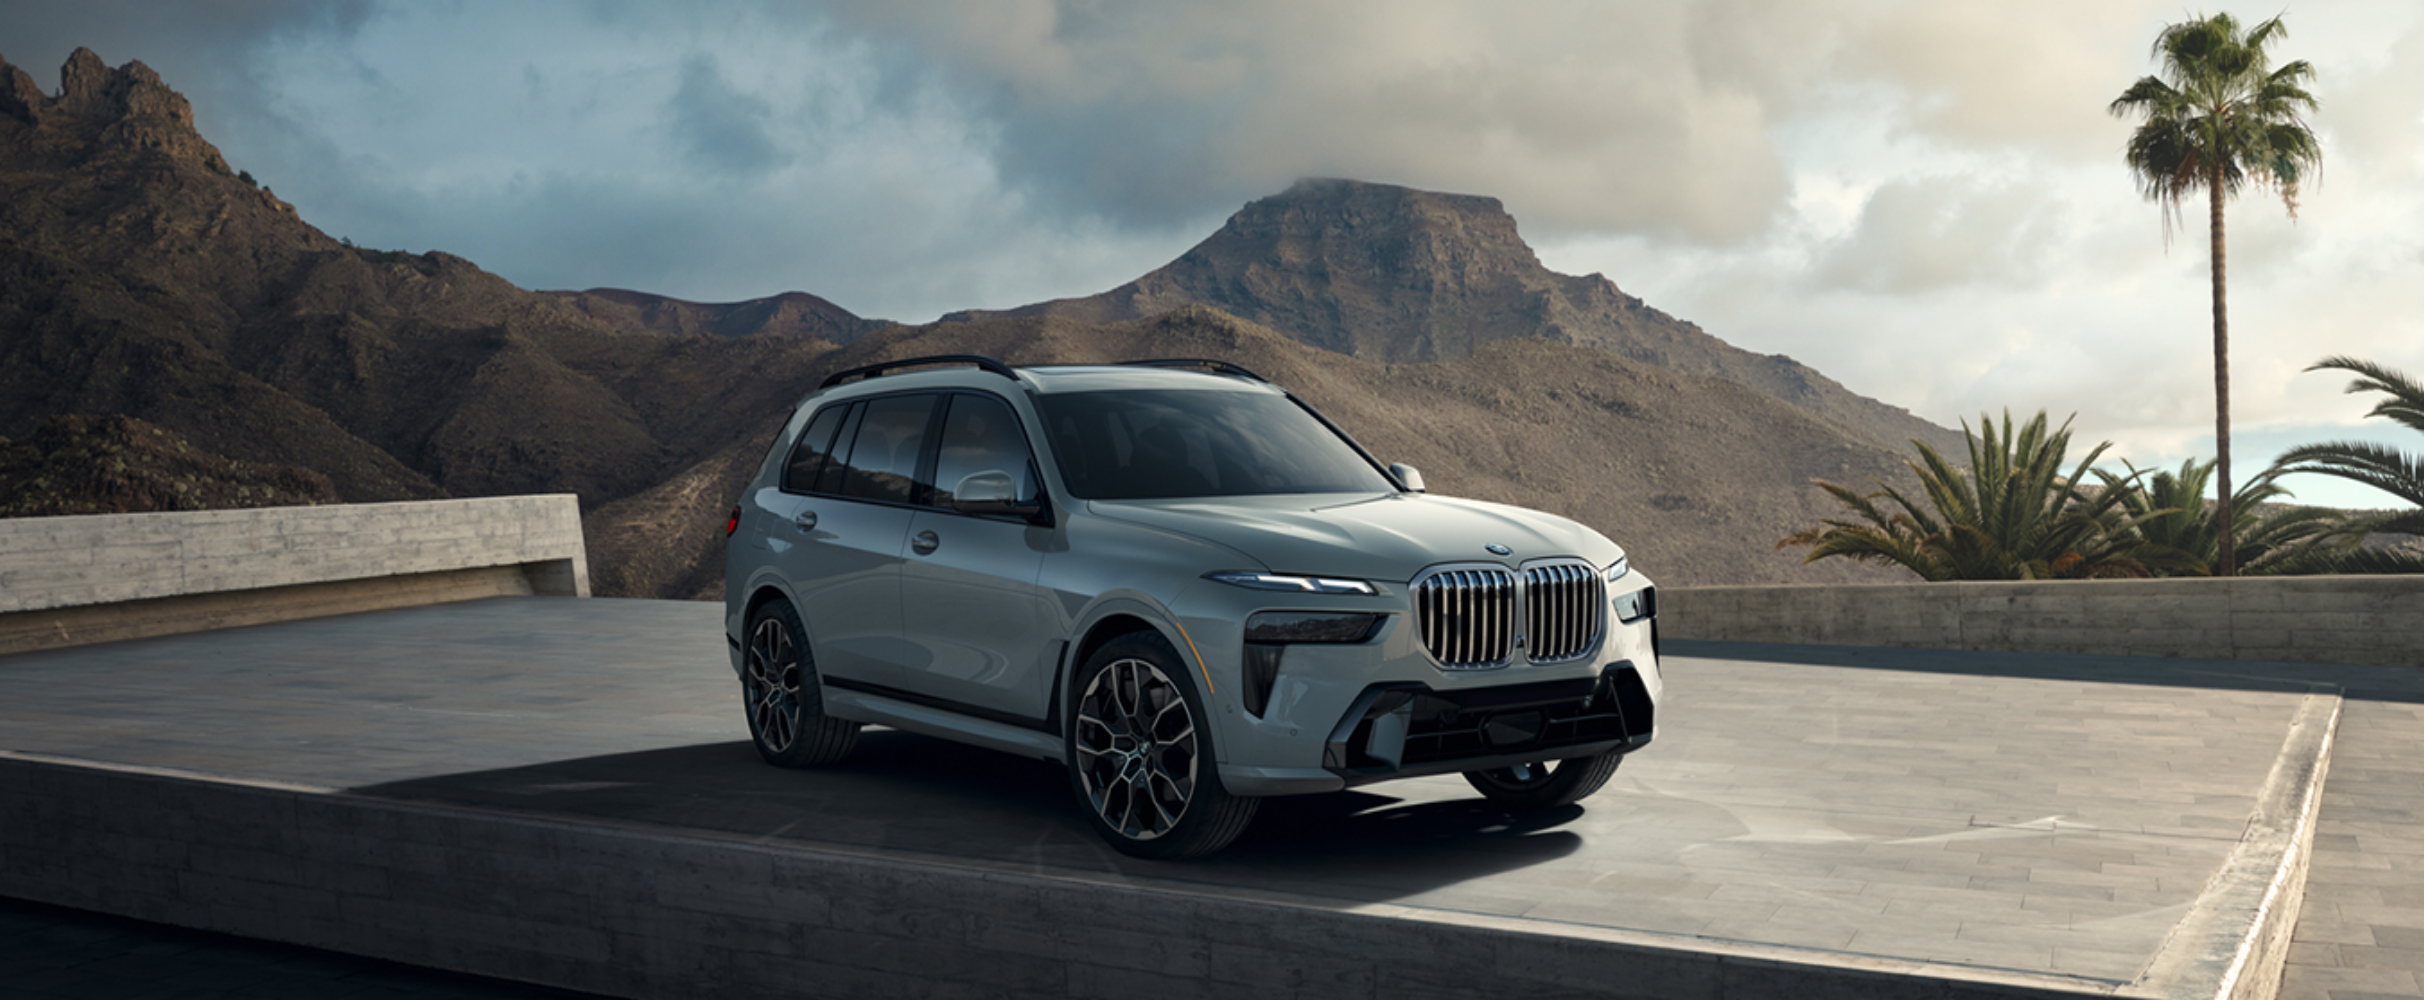 Gray BMW X7 parked with mountain and palm tree background